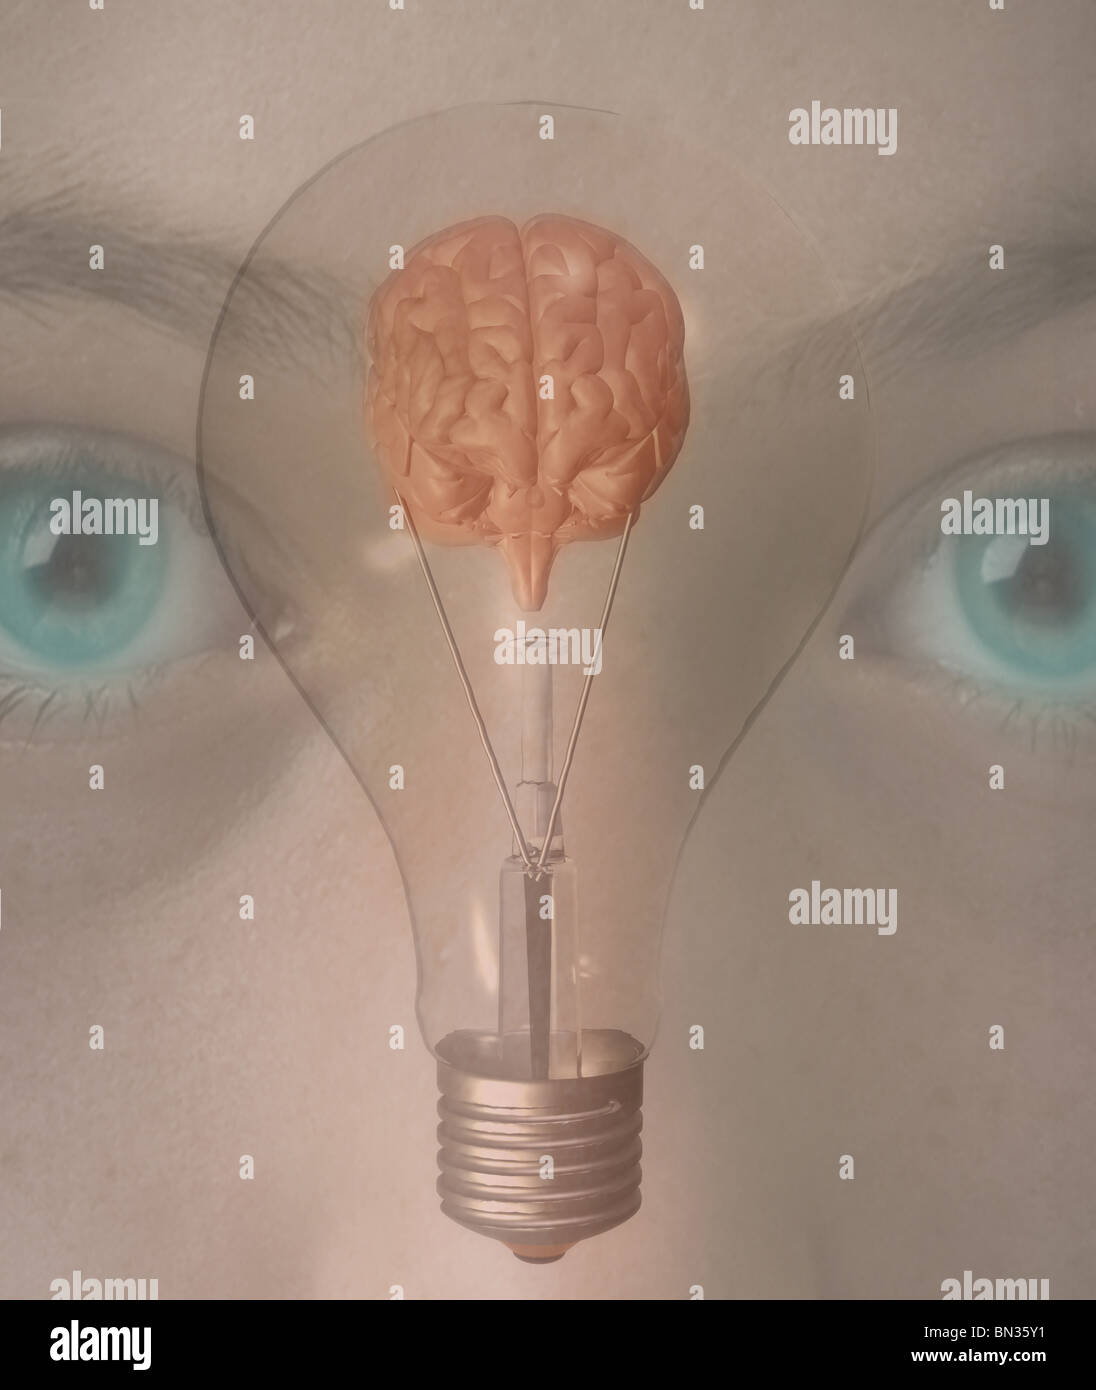 A light bulb and a human brain superimposed over a photograph of a girl Stock Photo